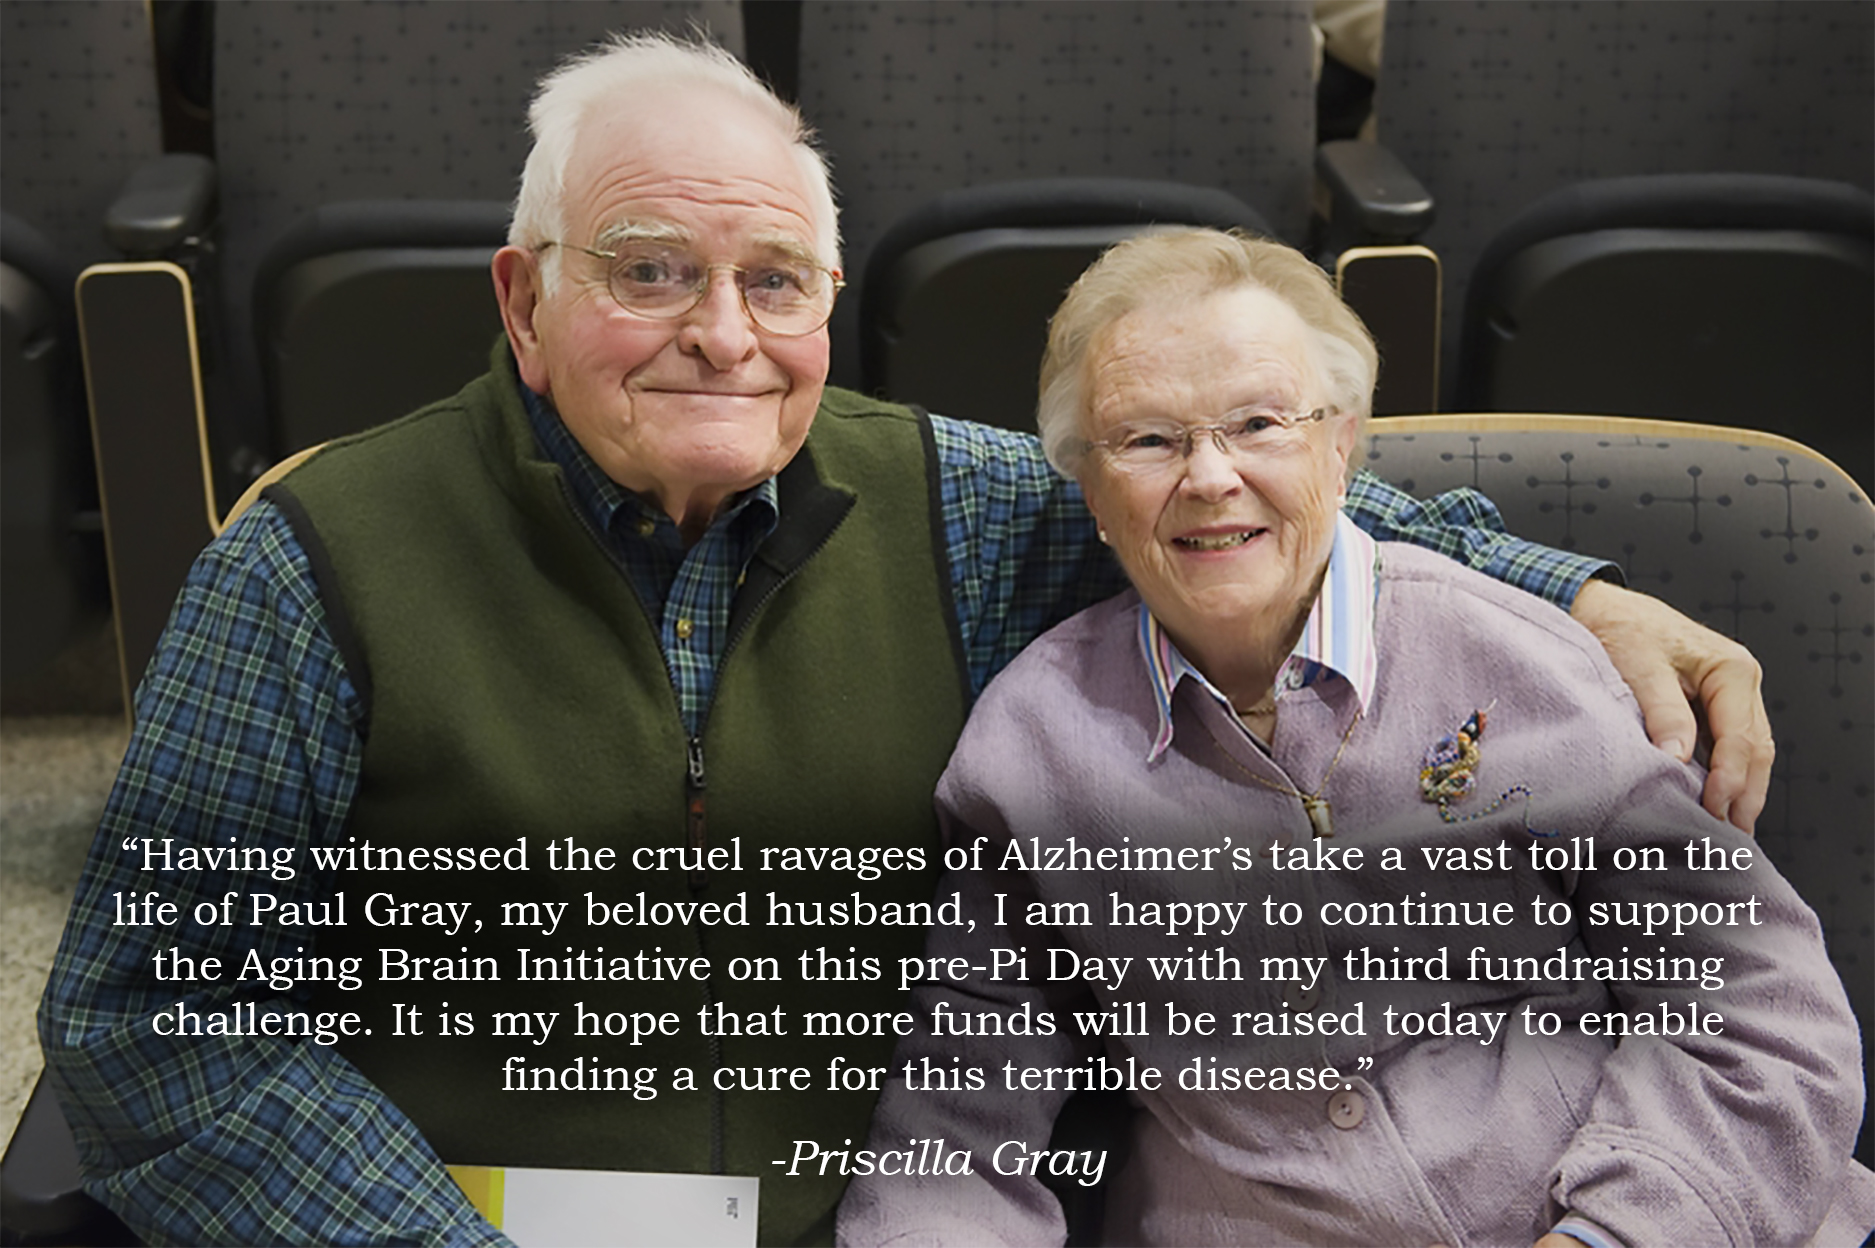 Paul and Priscilla Gray sit in adjacent seats in a lecture hall. Overlaid is a quote saying, "Having witnessed the cruel ravages of Alzheimer’s take a vast toll on the life of Paul Gray, my beloved husband, I am happy to continue to support the Aging Brain Initiative on this pre-Pi Day with my third fundraising challenge. It is my hope that more funds will be raised today to enable finding a cure for this terrible disease.”